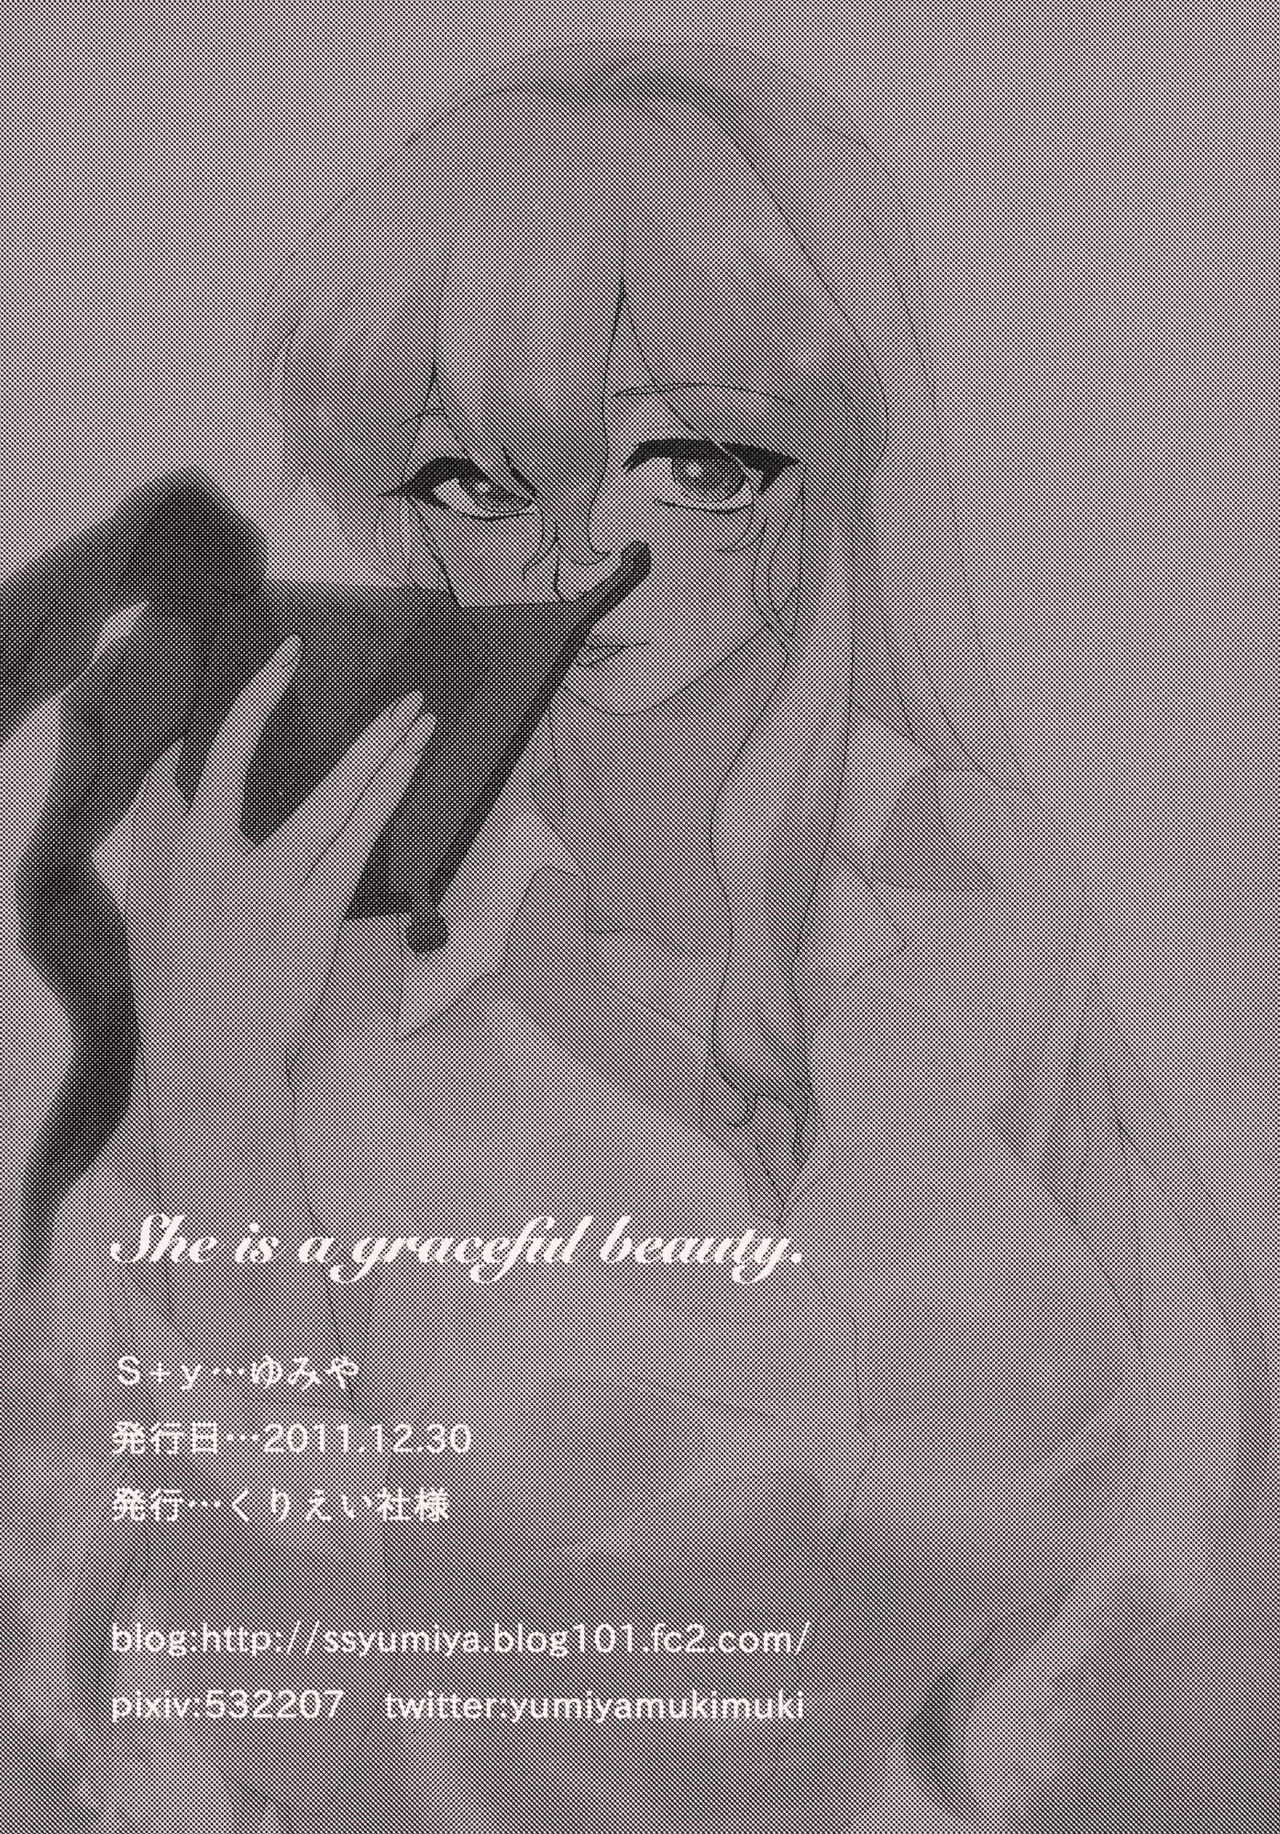 (C81) [S+y] She is a graceful beauty (Touhou Project) [ENG] (C81) [S+y] She is a graceful beauty (東方Project)